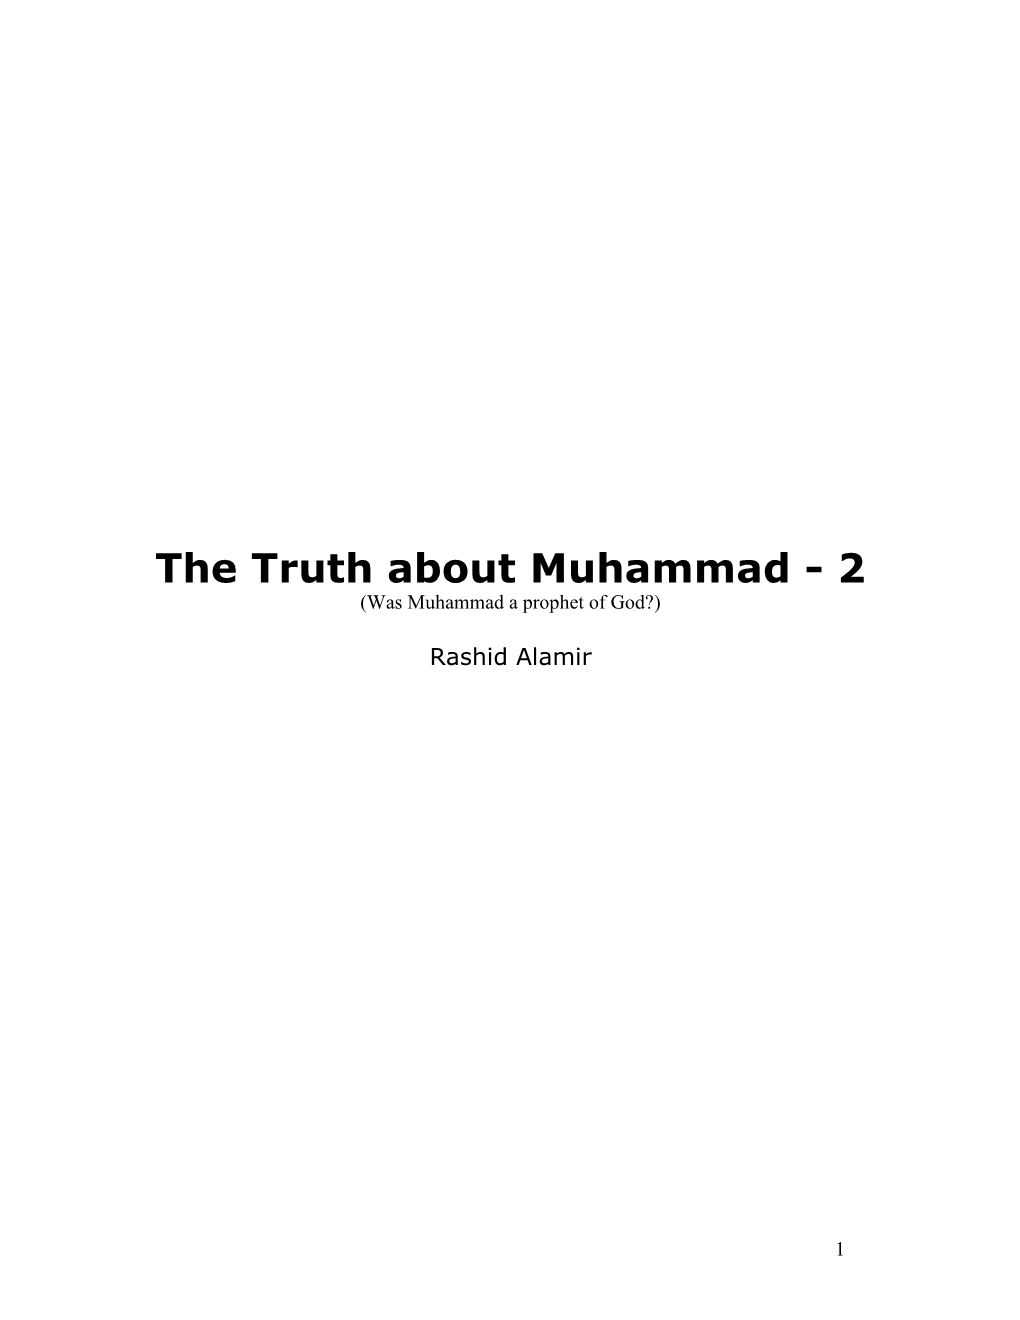 The Truth About Muhammad - 2 (Was Muhammad a Prophet of God?)